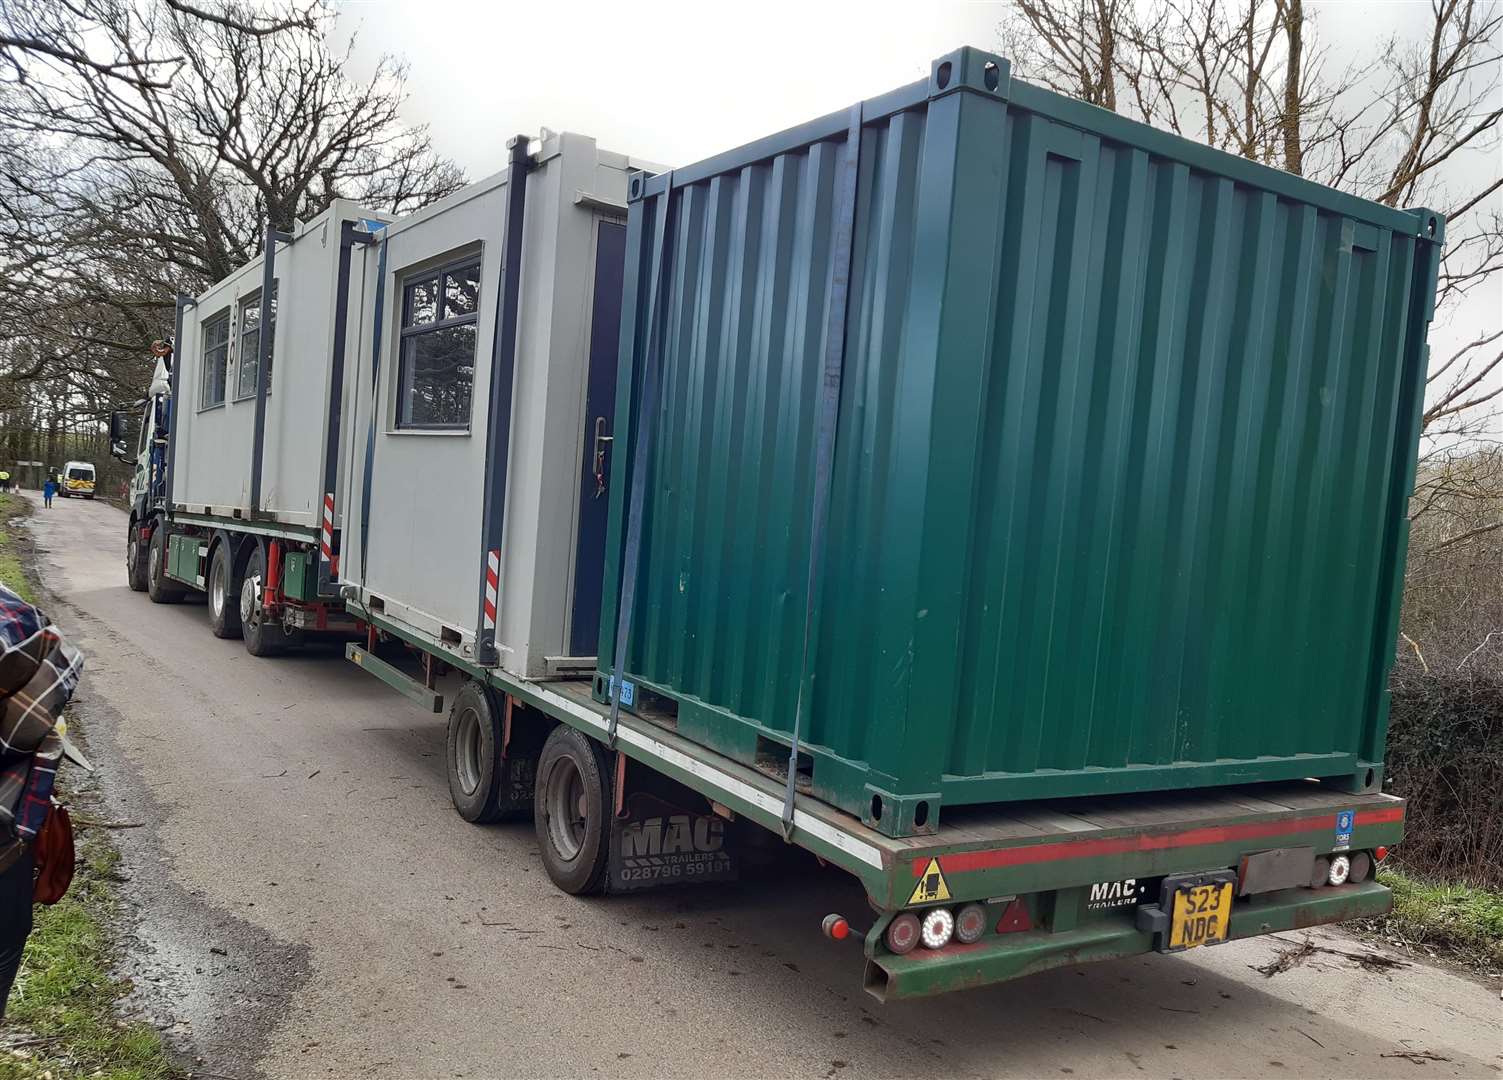 Welfare units arrived on the back of a lorry on Thursday